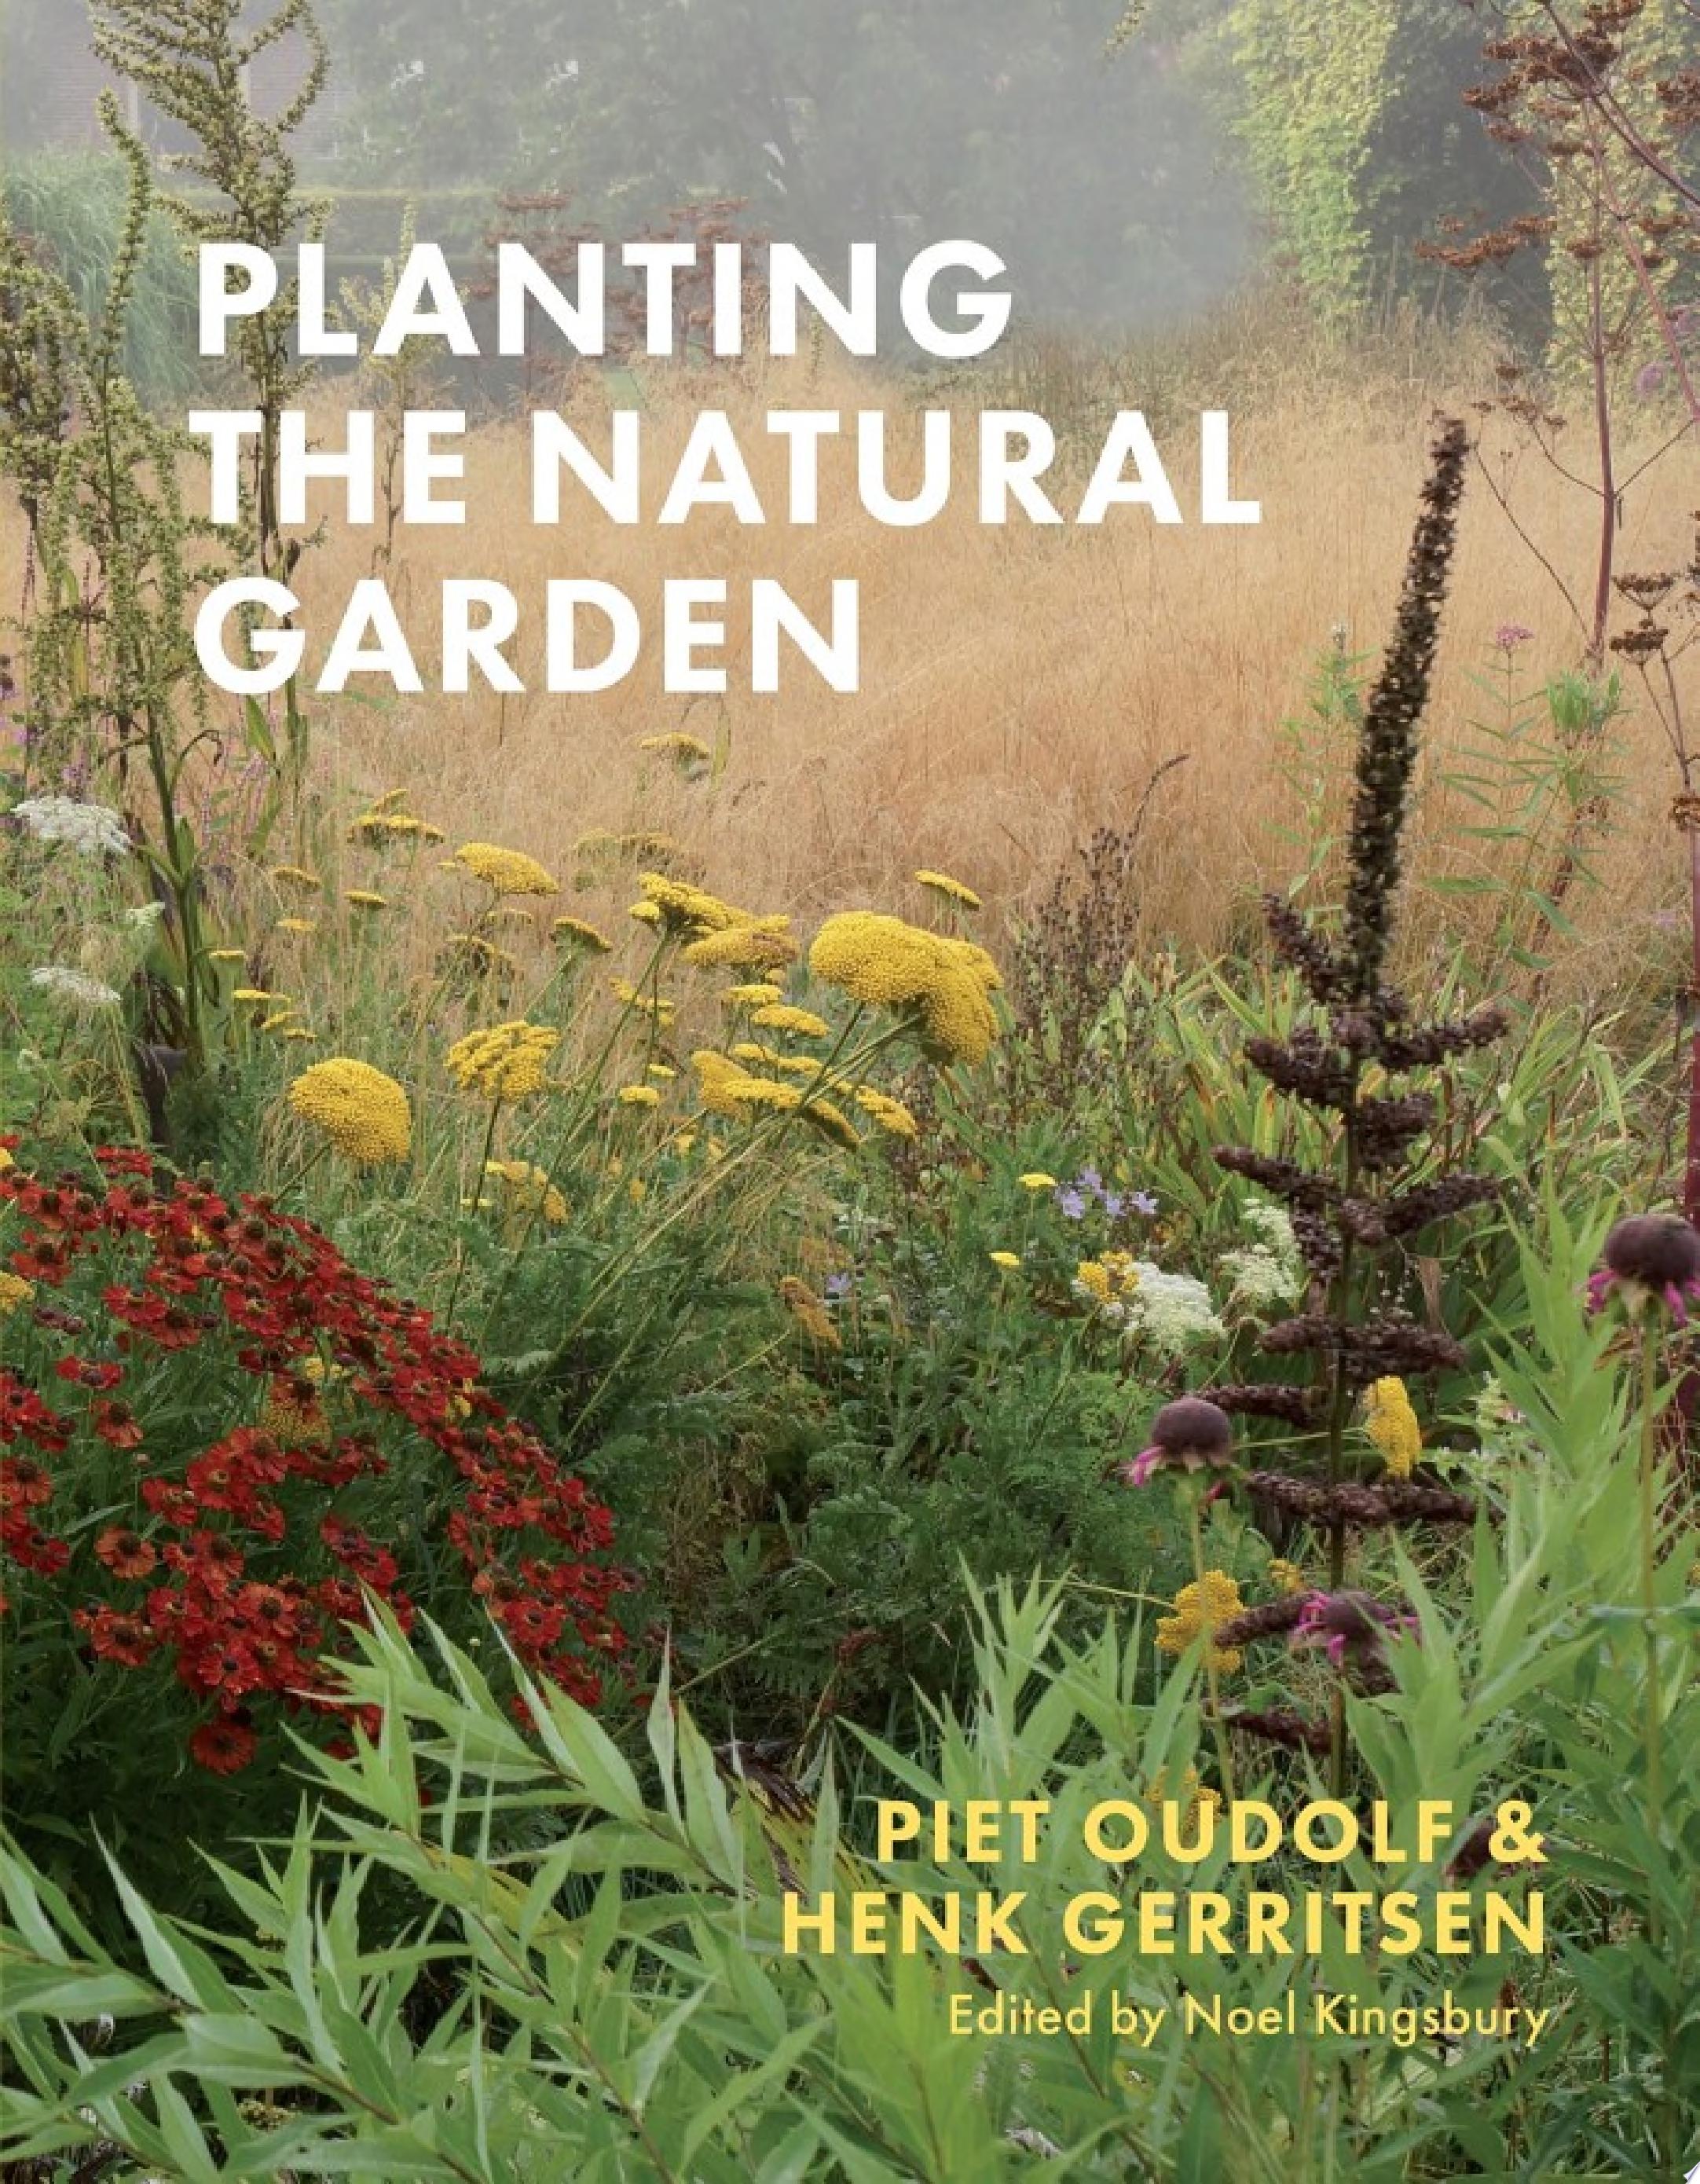 Image for "Planting the Natural Garden"